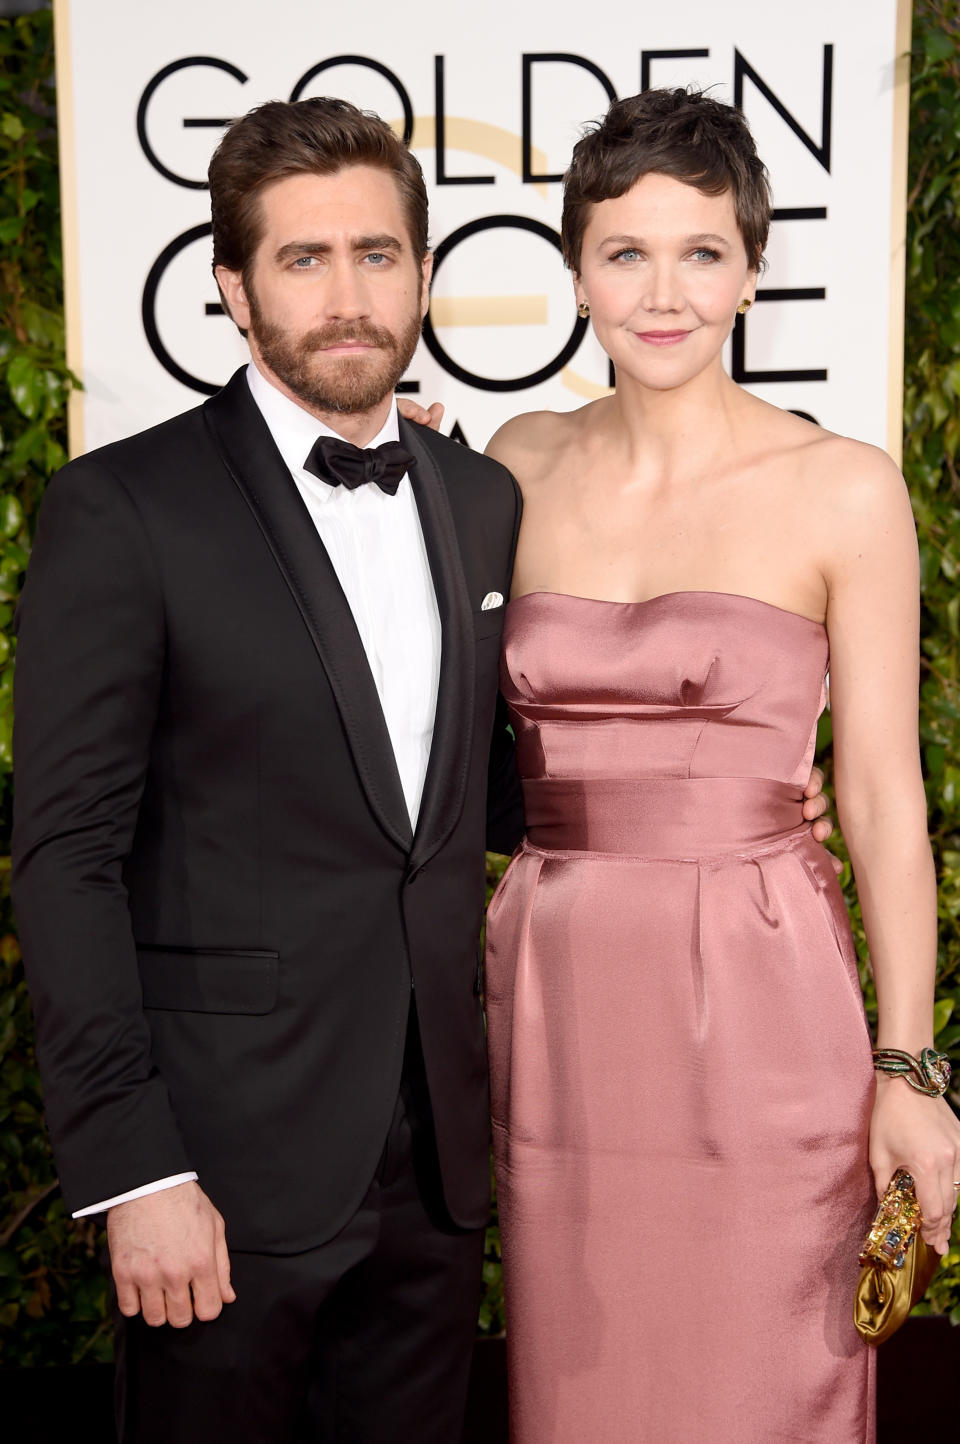 Jake with his sister Maggie at the 72nd Annual Golden Globe Awards in January 11, 2015 [Photo: Getty Images]